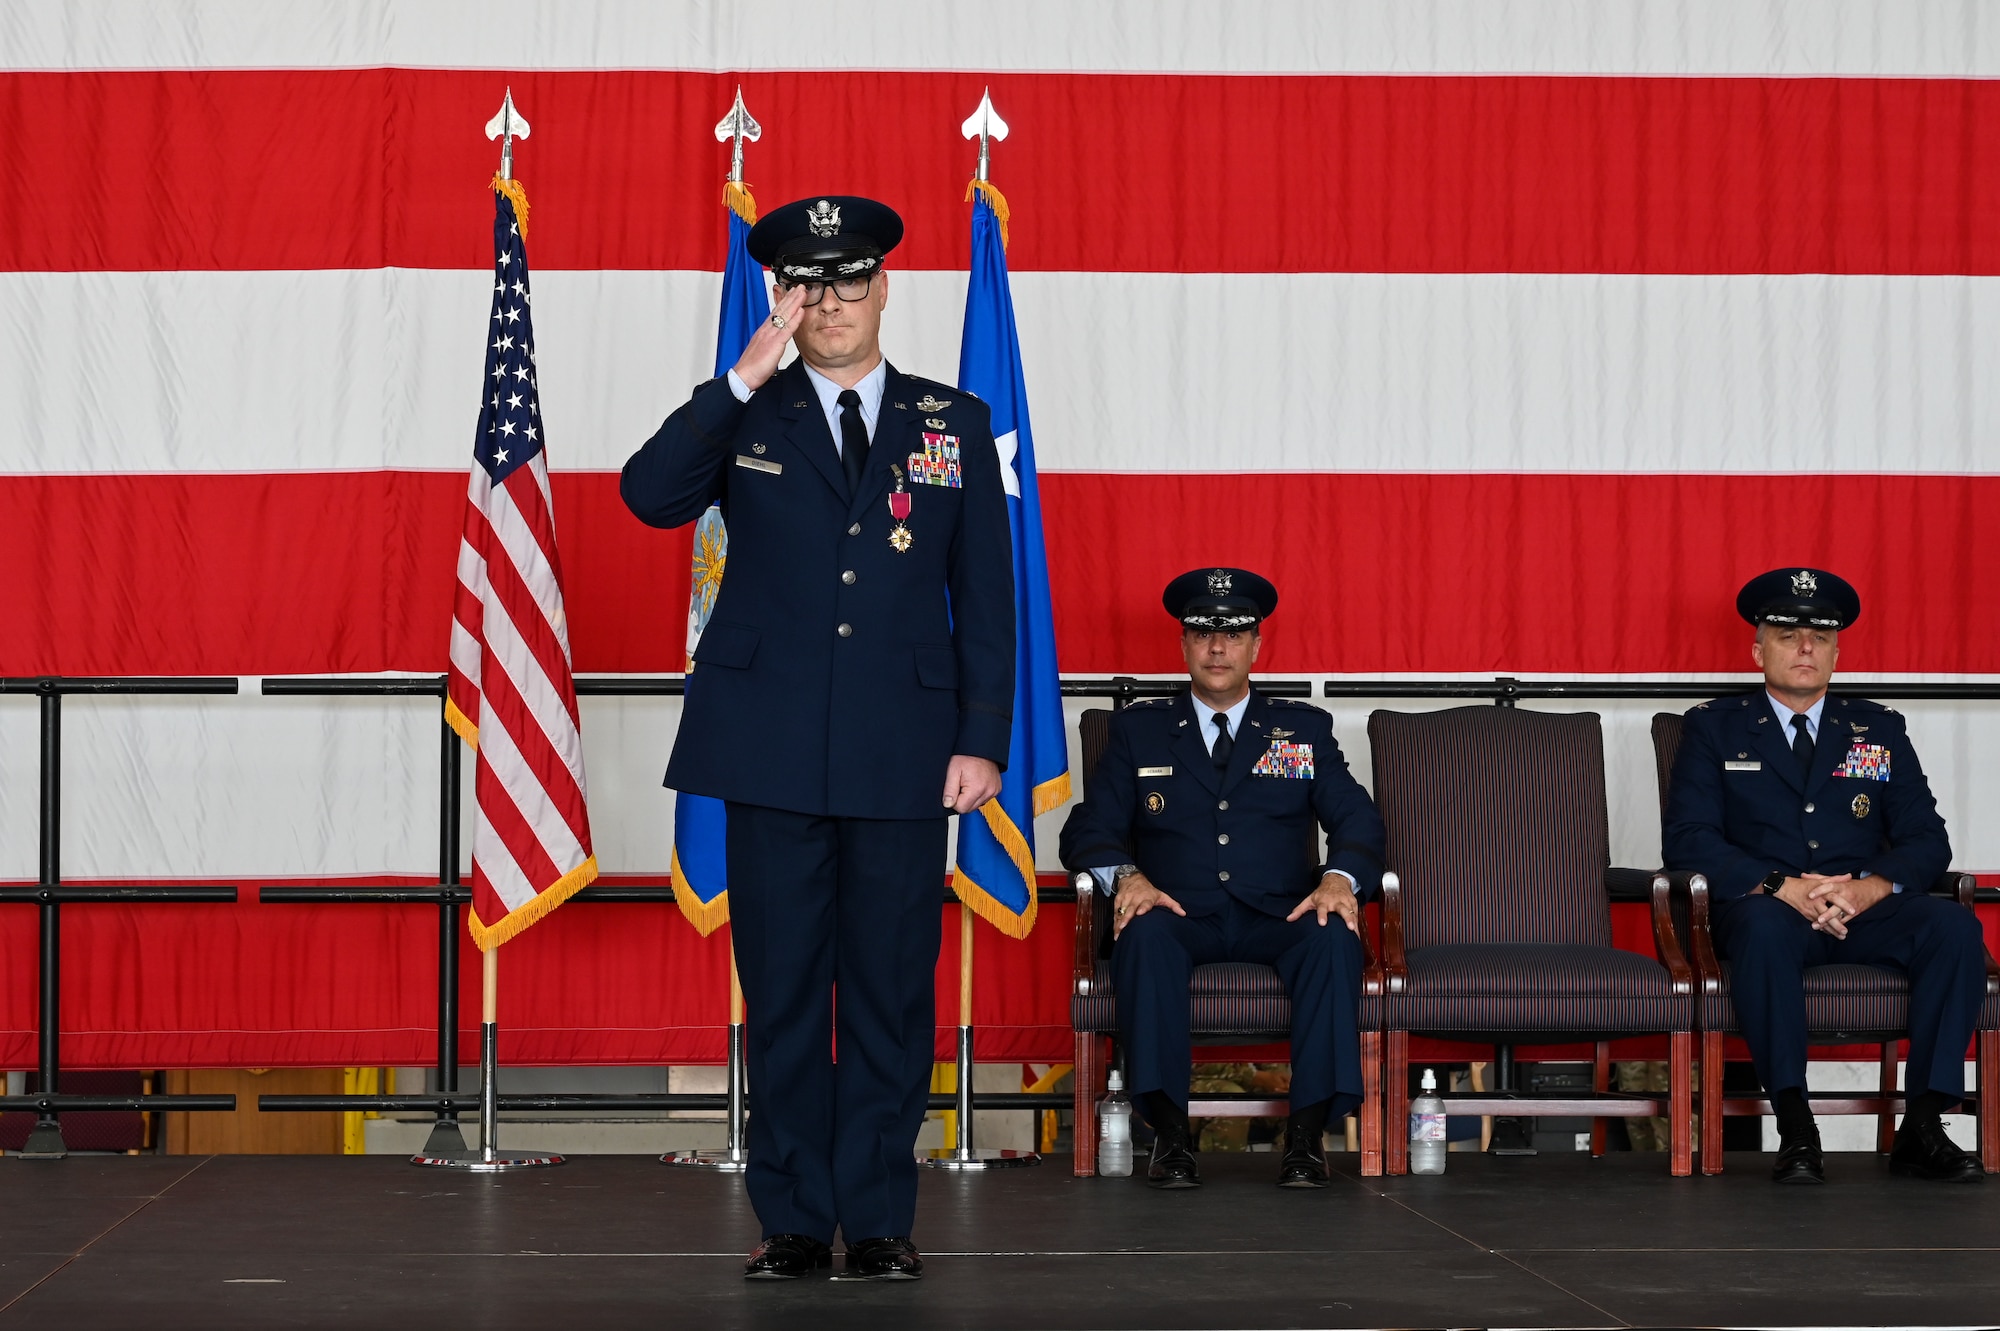 509th Bomb Wing Change of Command 2023